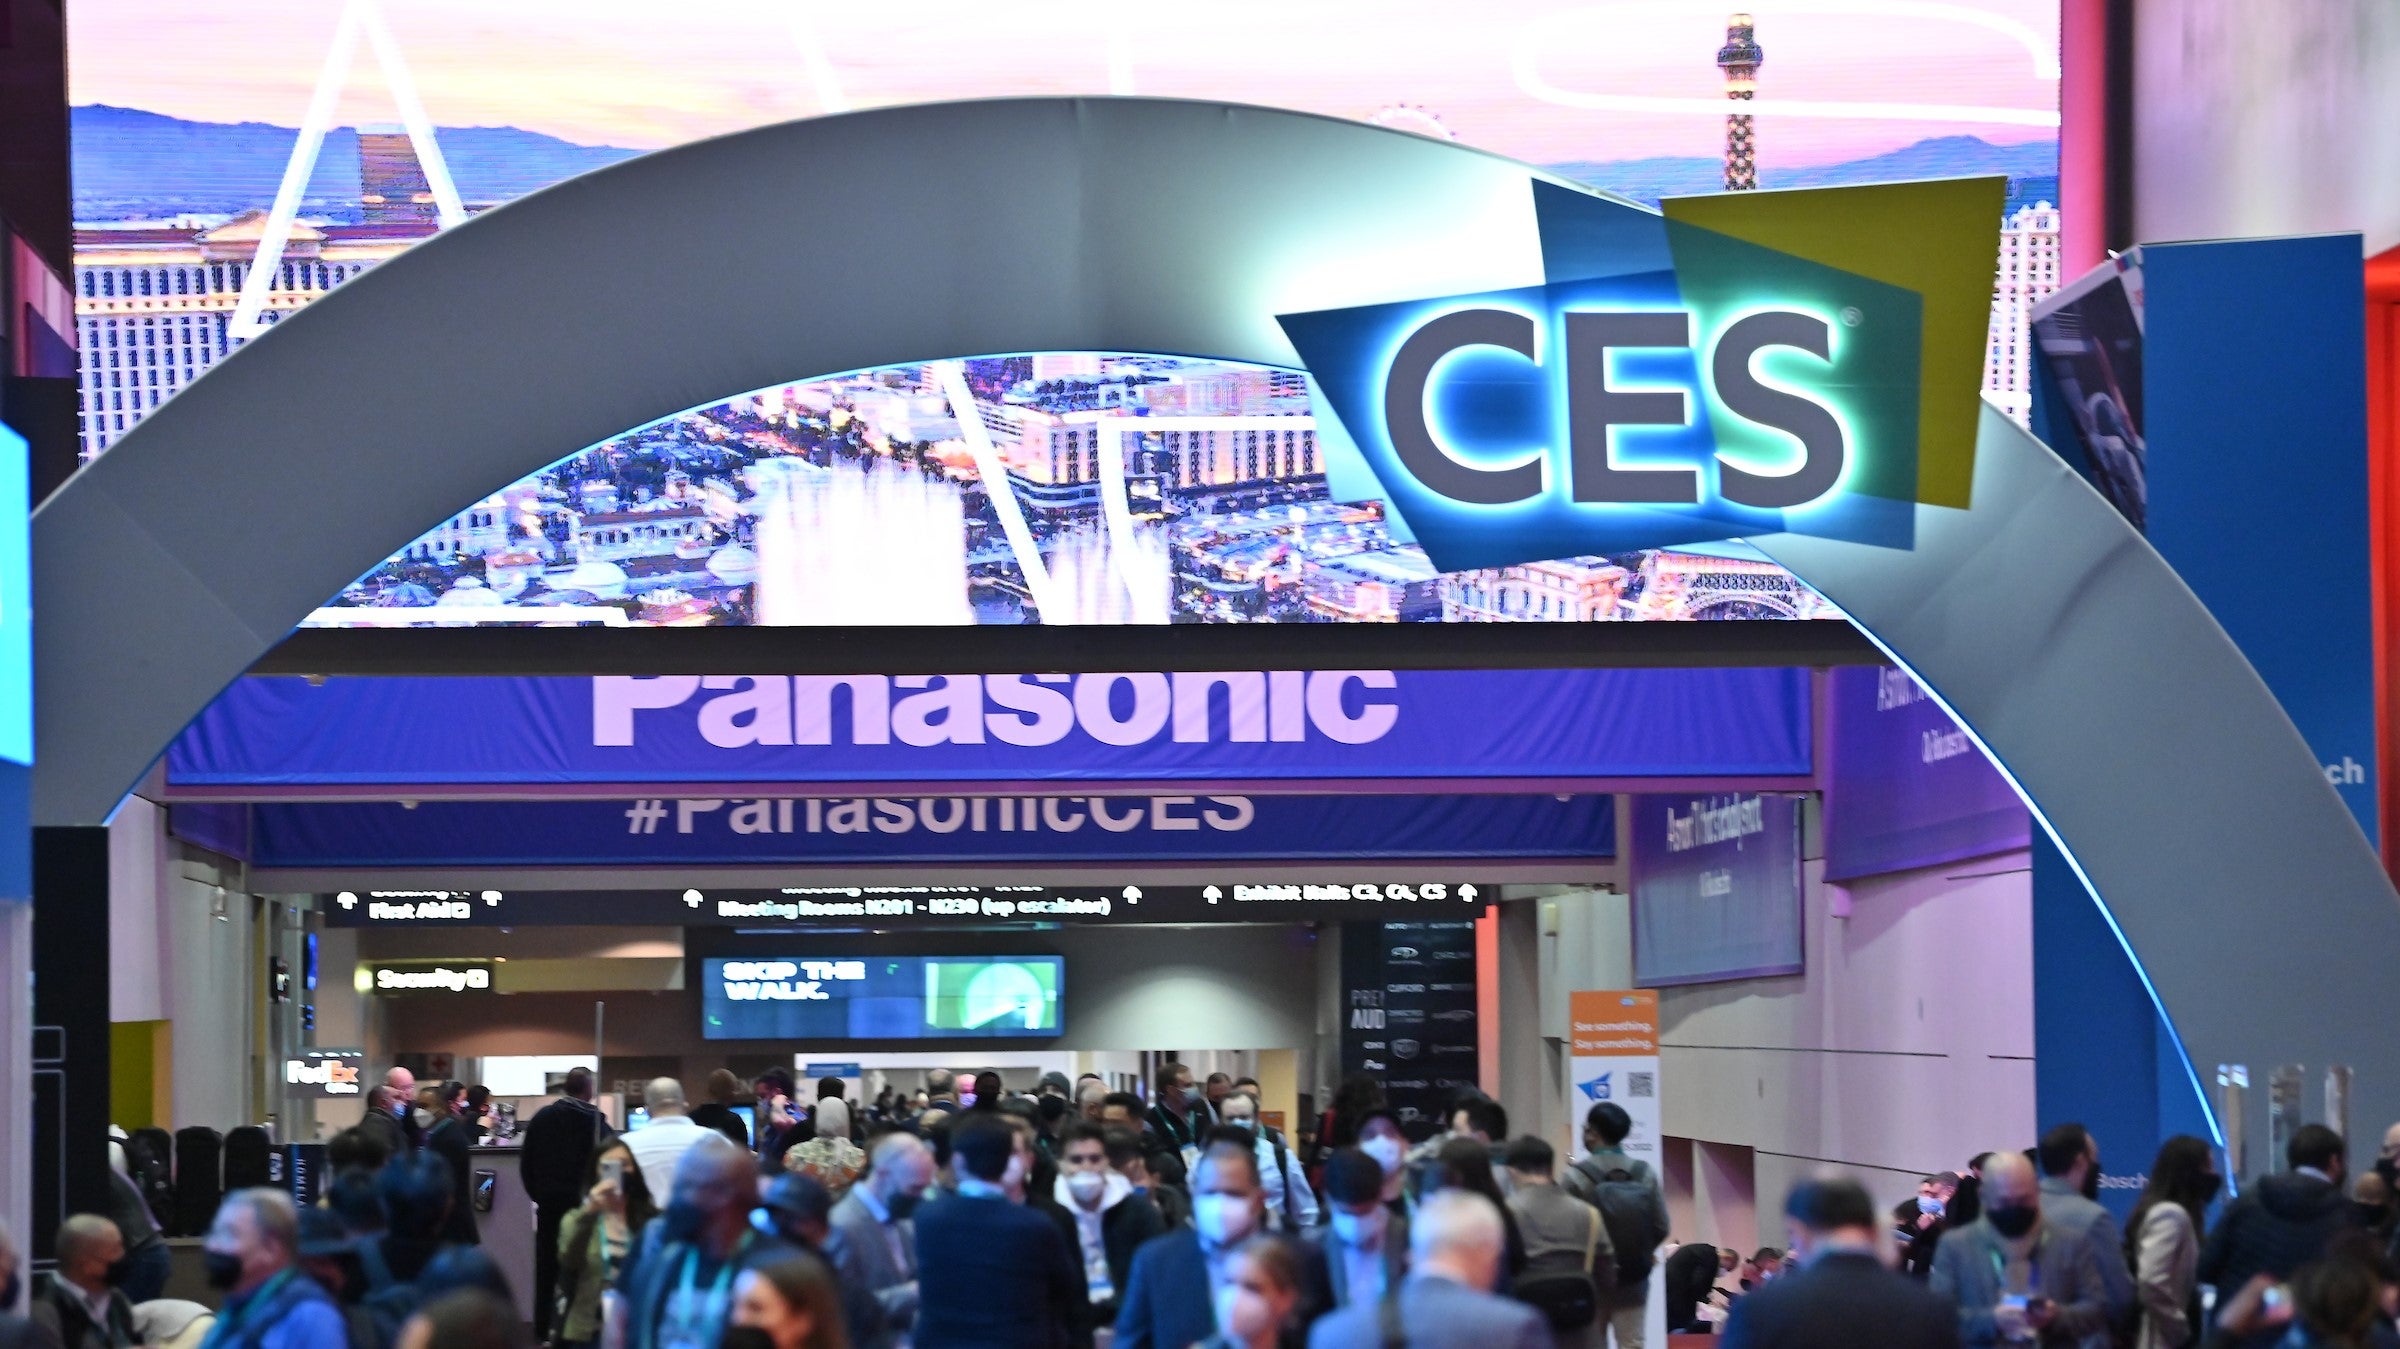 A busy scene from the CES 2022 show floor, with CES signage shown on an large arch.